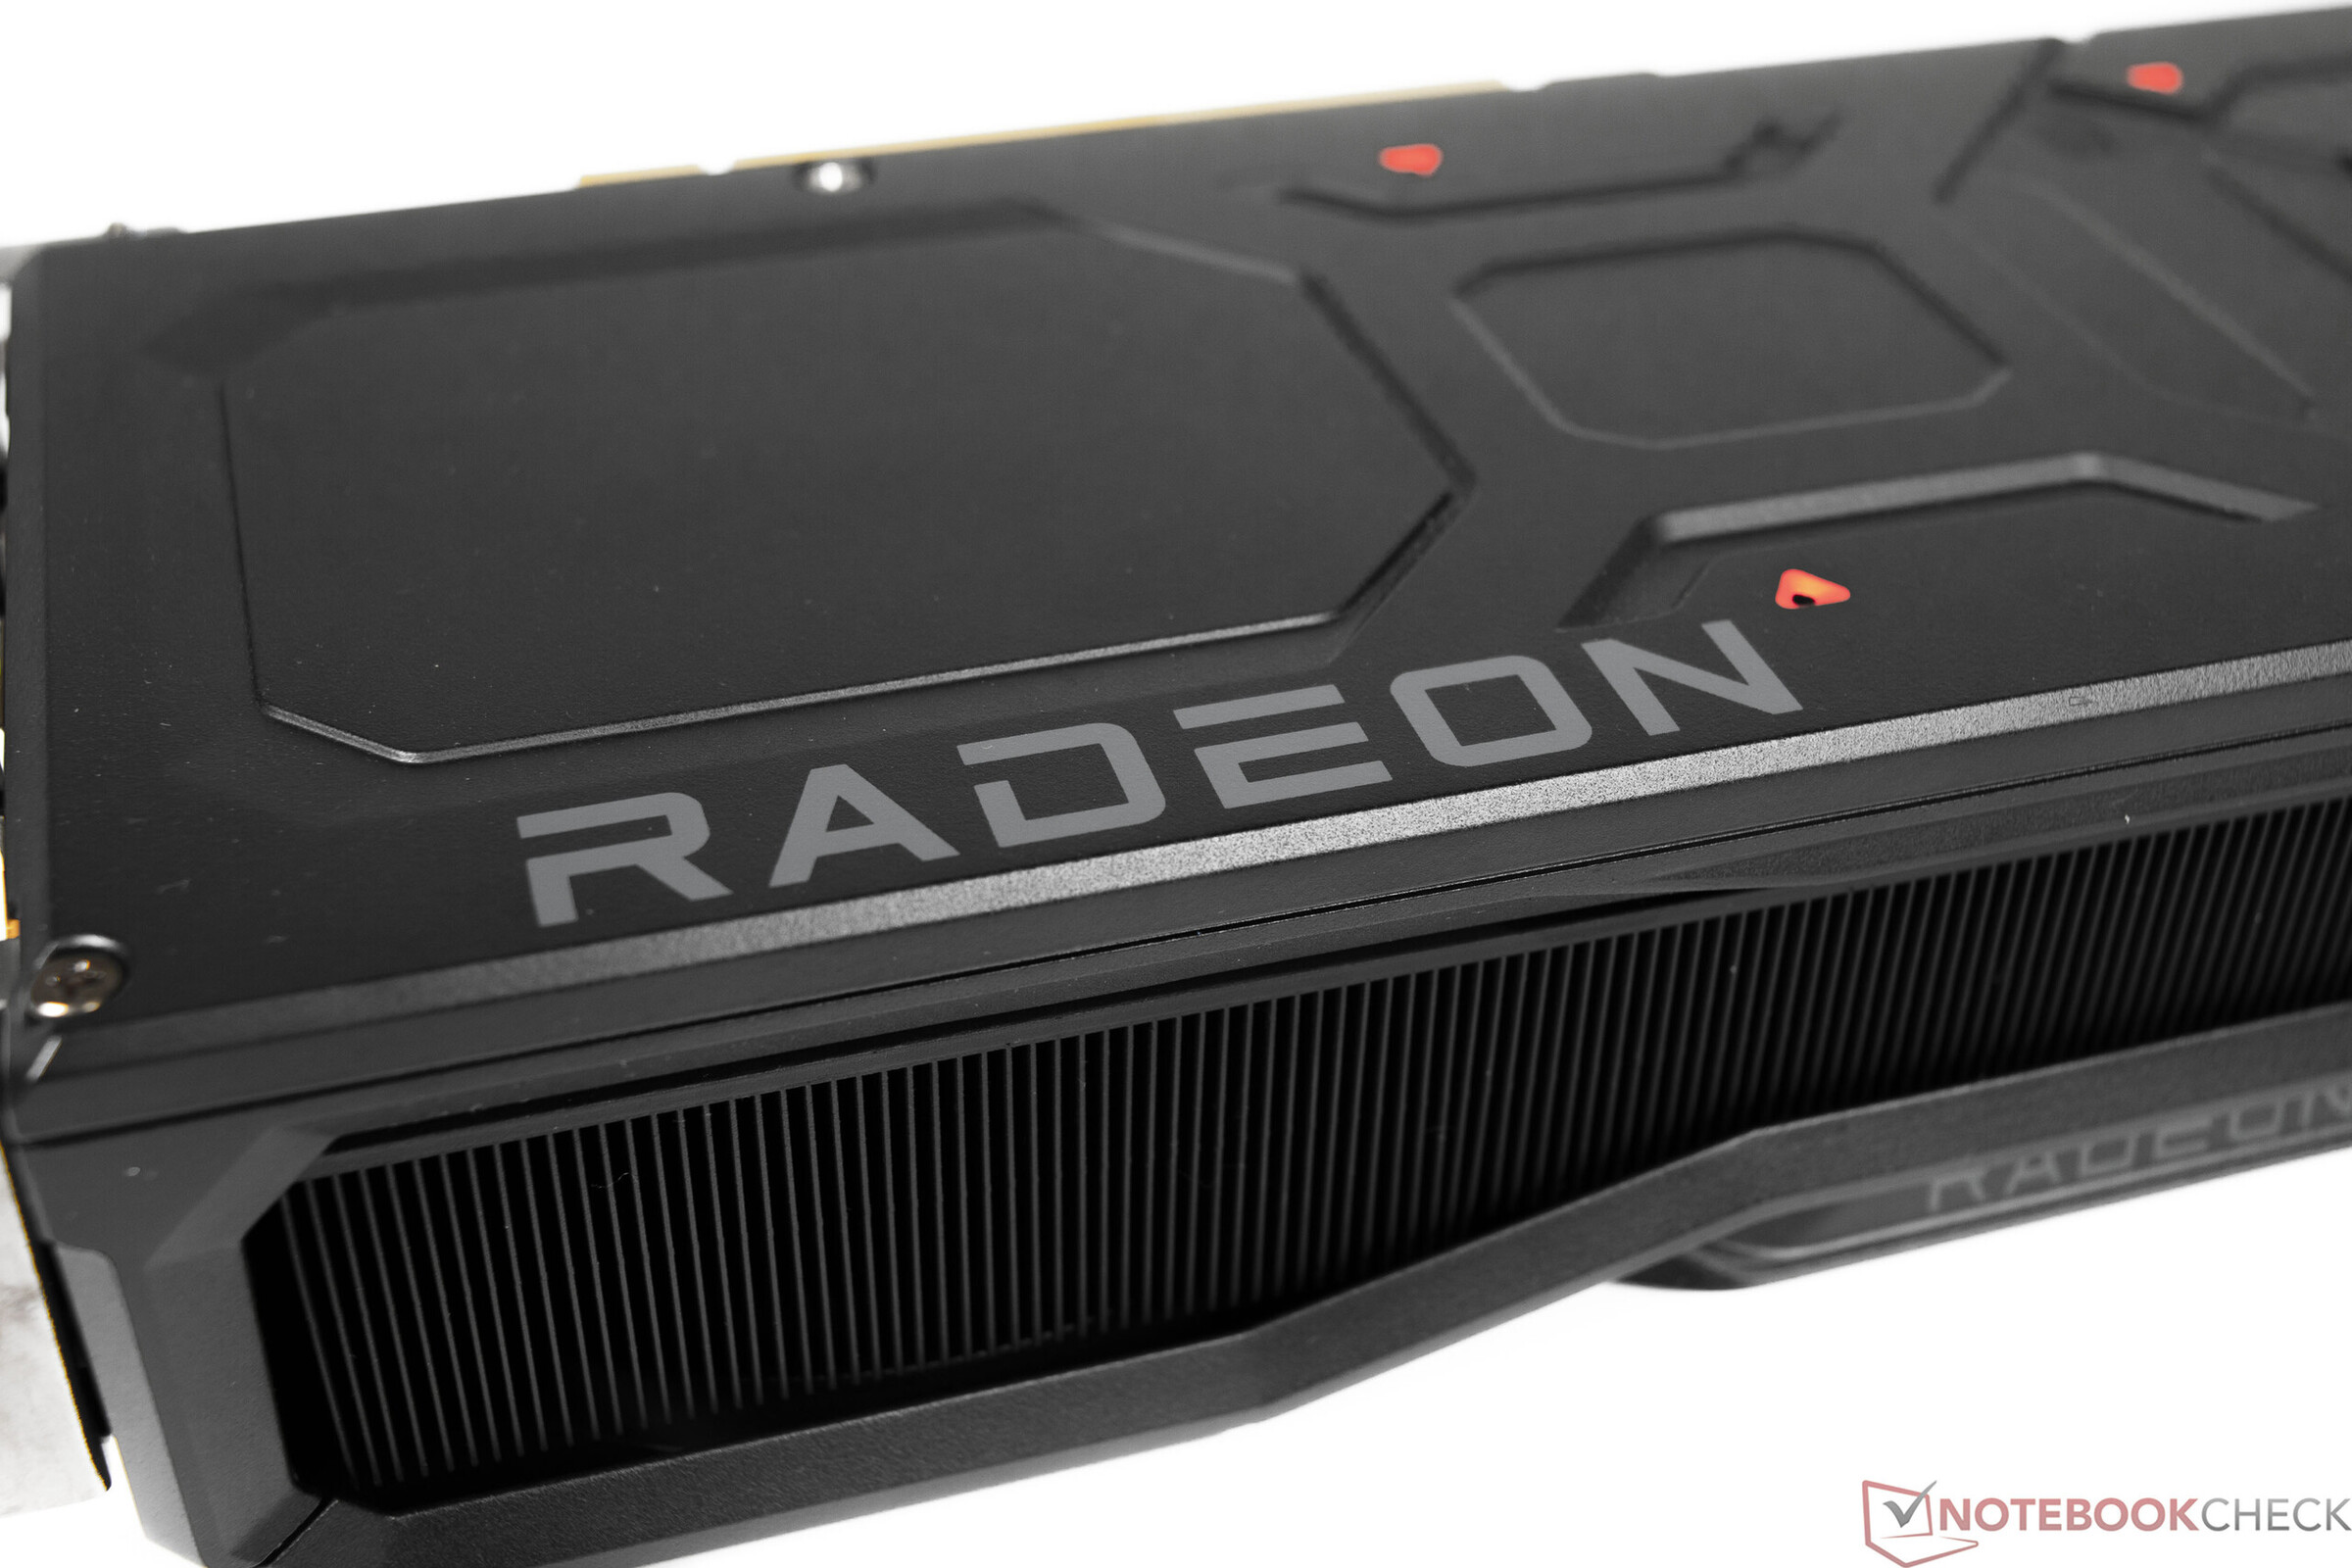 AMD Radeon RX 7600 XT reportedly launches on May 25th 